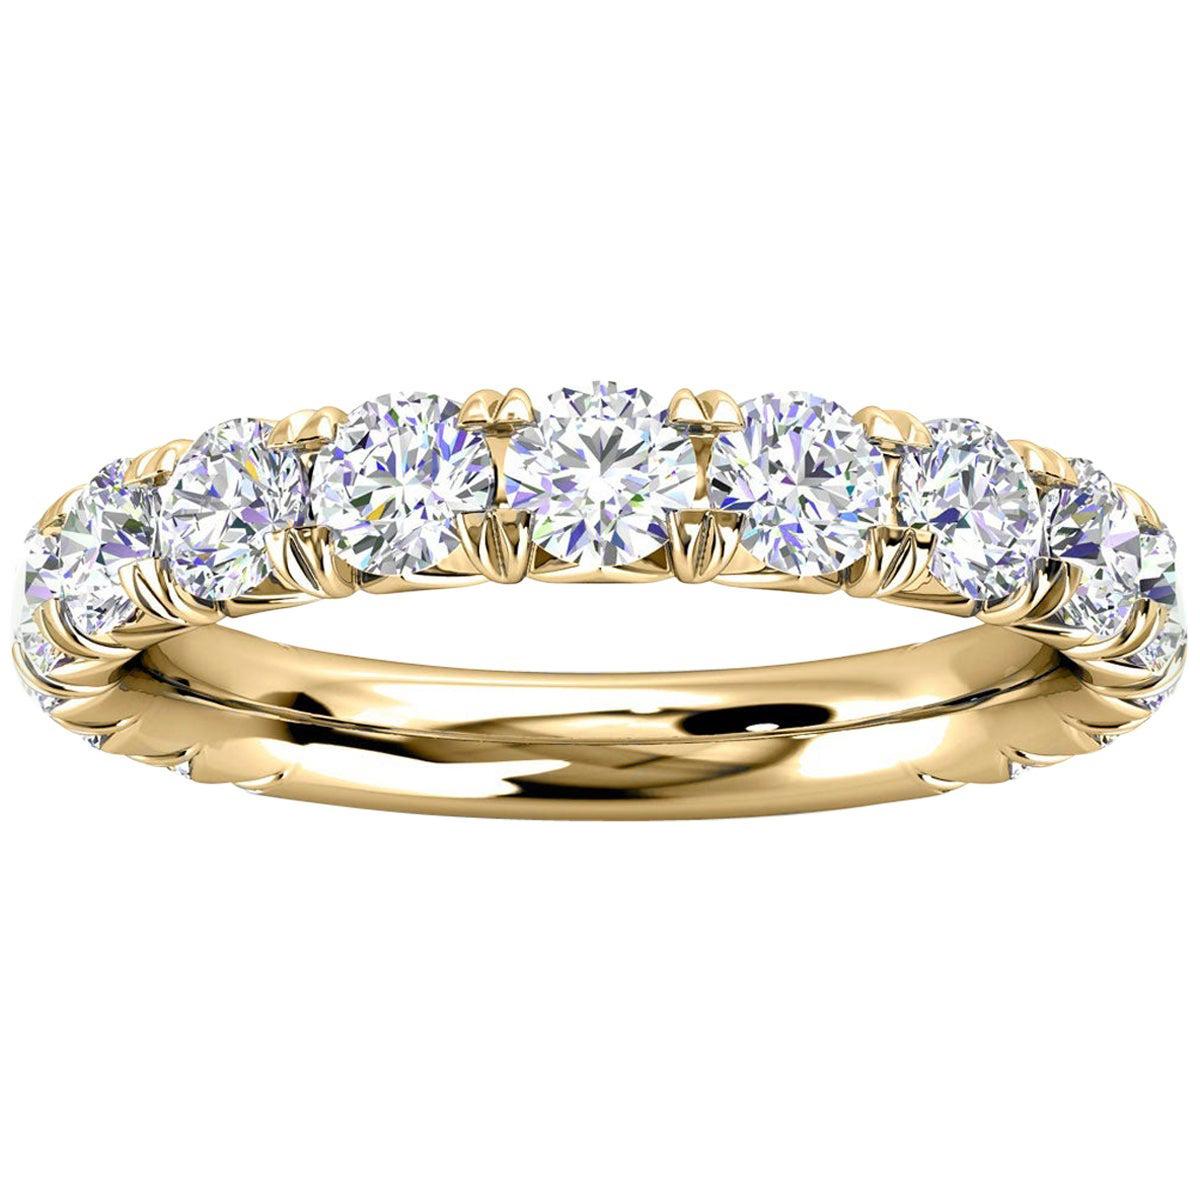 For Sale:  14k Yellow Gold GIA French Pave Diamond Ring '1 1/2 Ct. Tw'